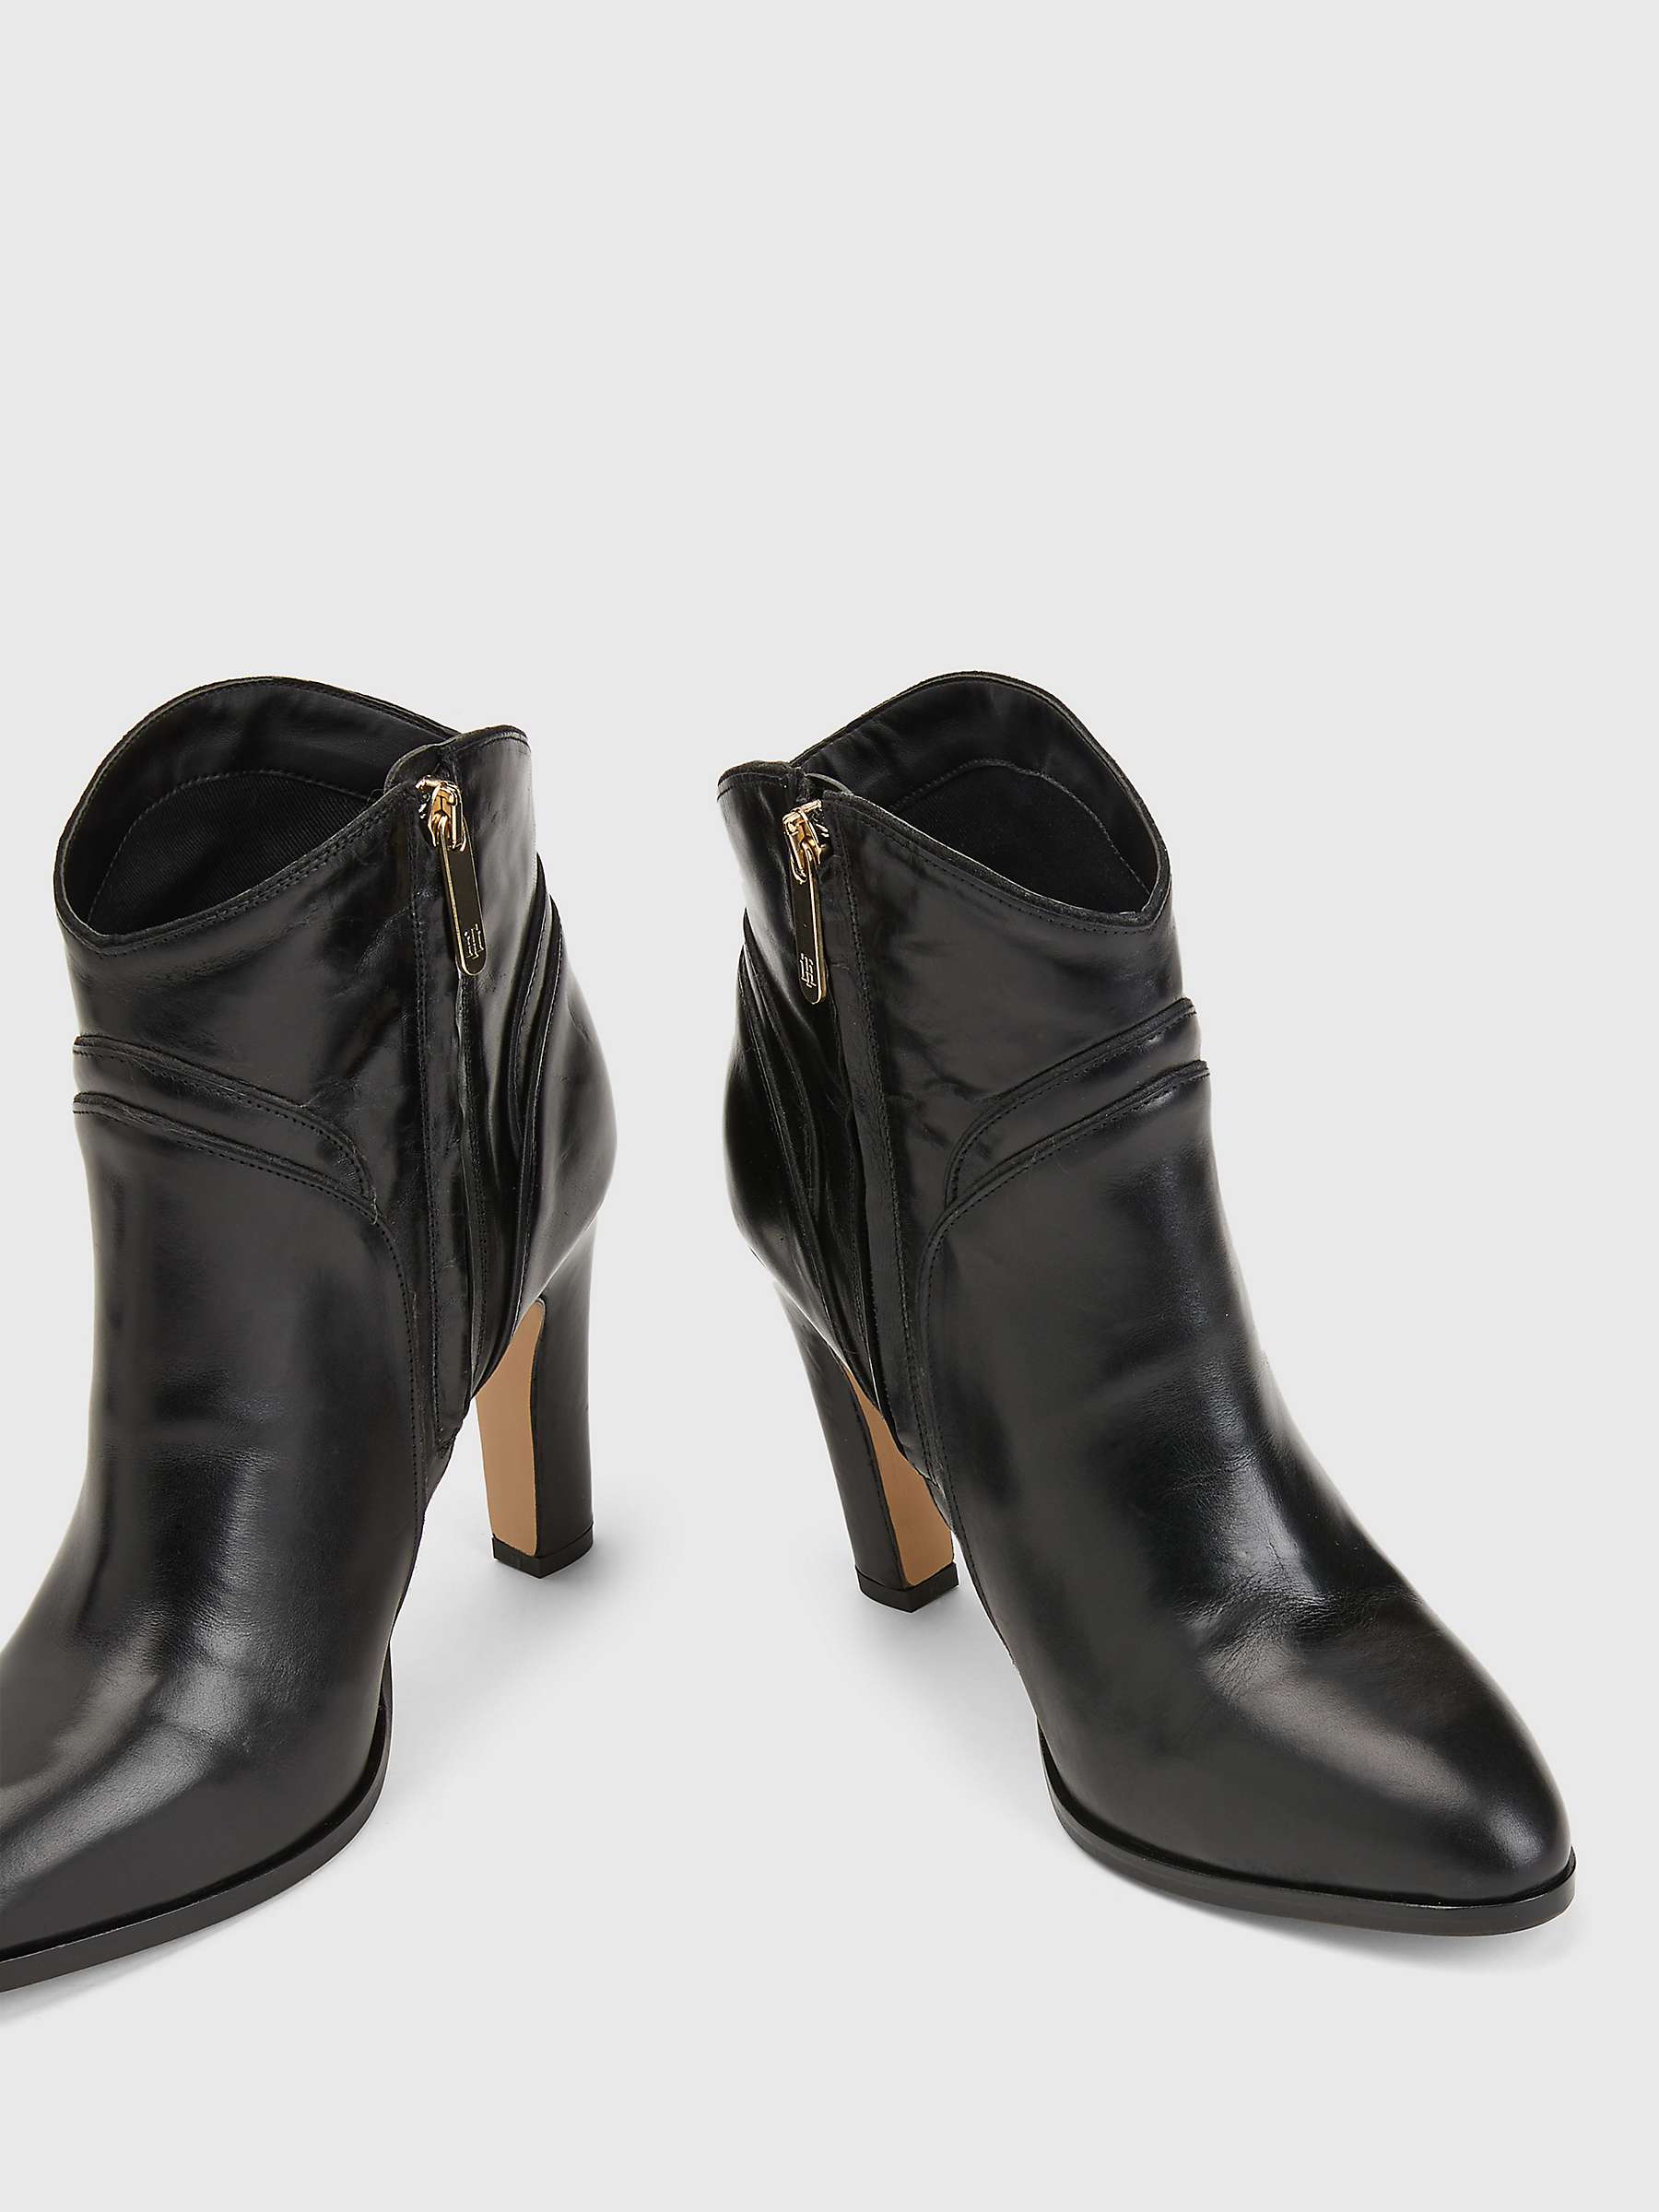 carpet mortgage To edit Tommy Hilfiger Leather High Heel Ankle Boots, Black at John Lewis & Partners